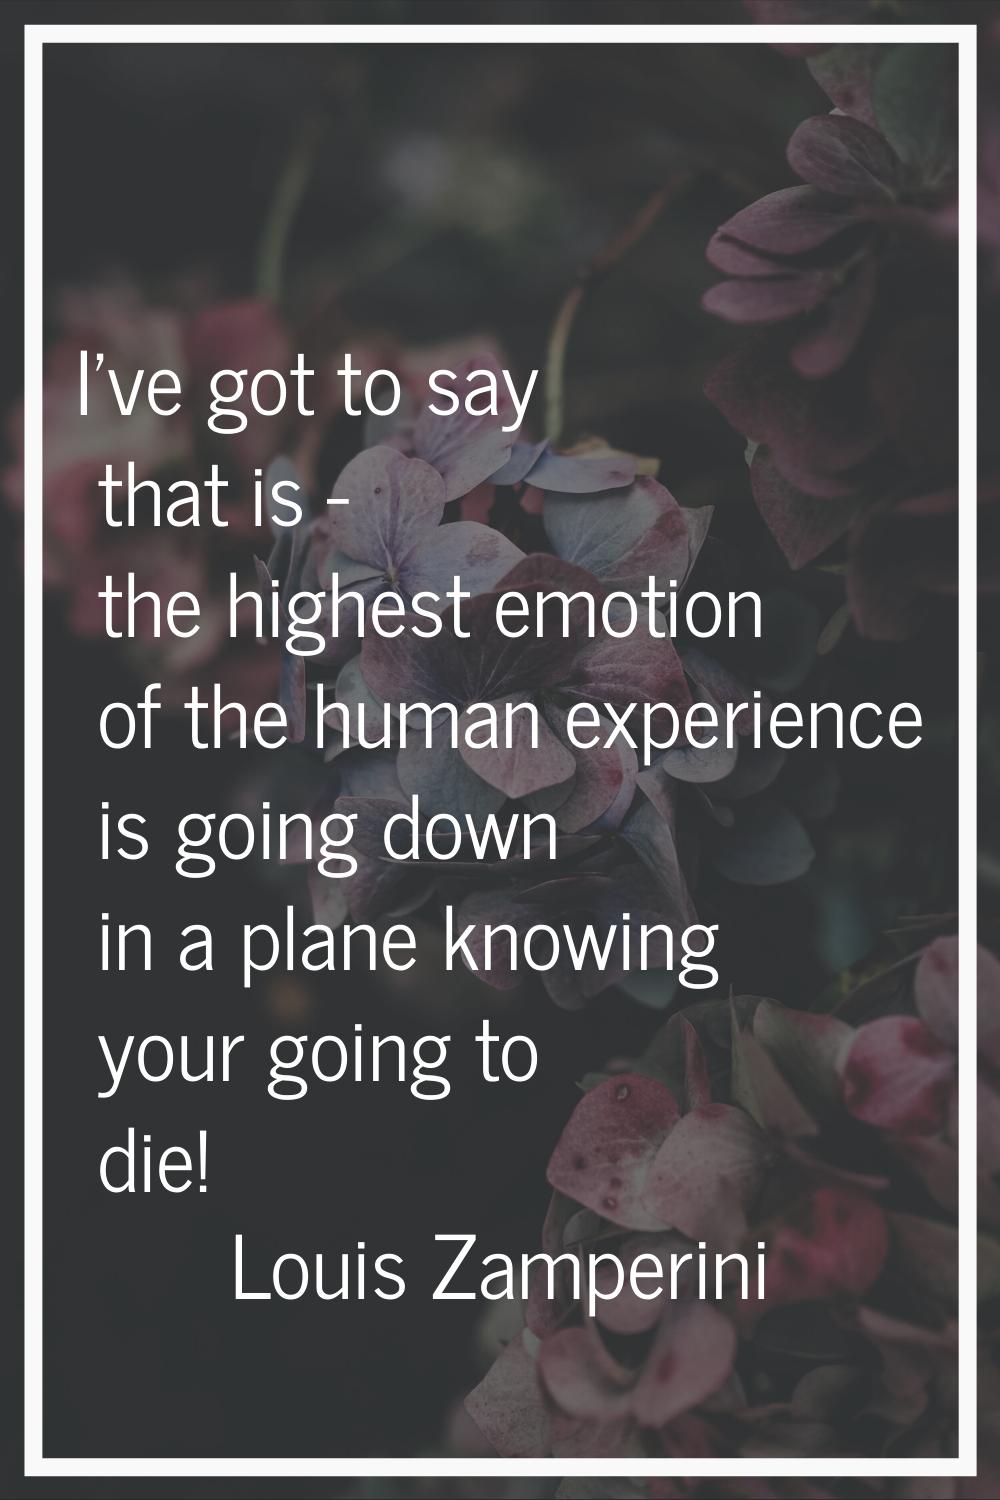 I've got to say that is - the highest emotion of the human experience is going down in a plane know